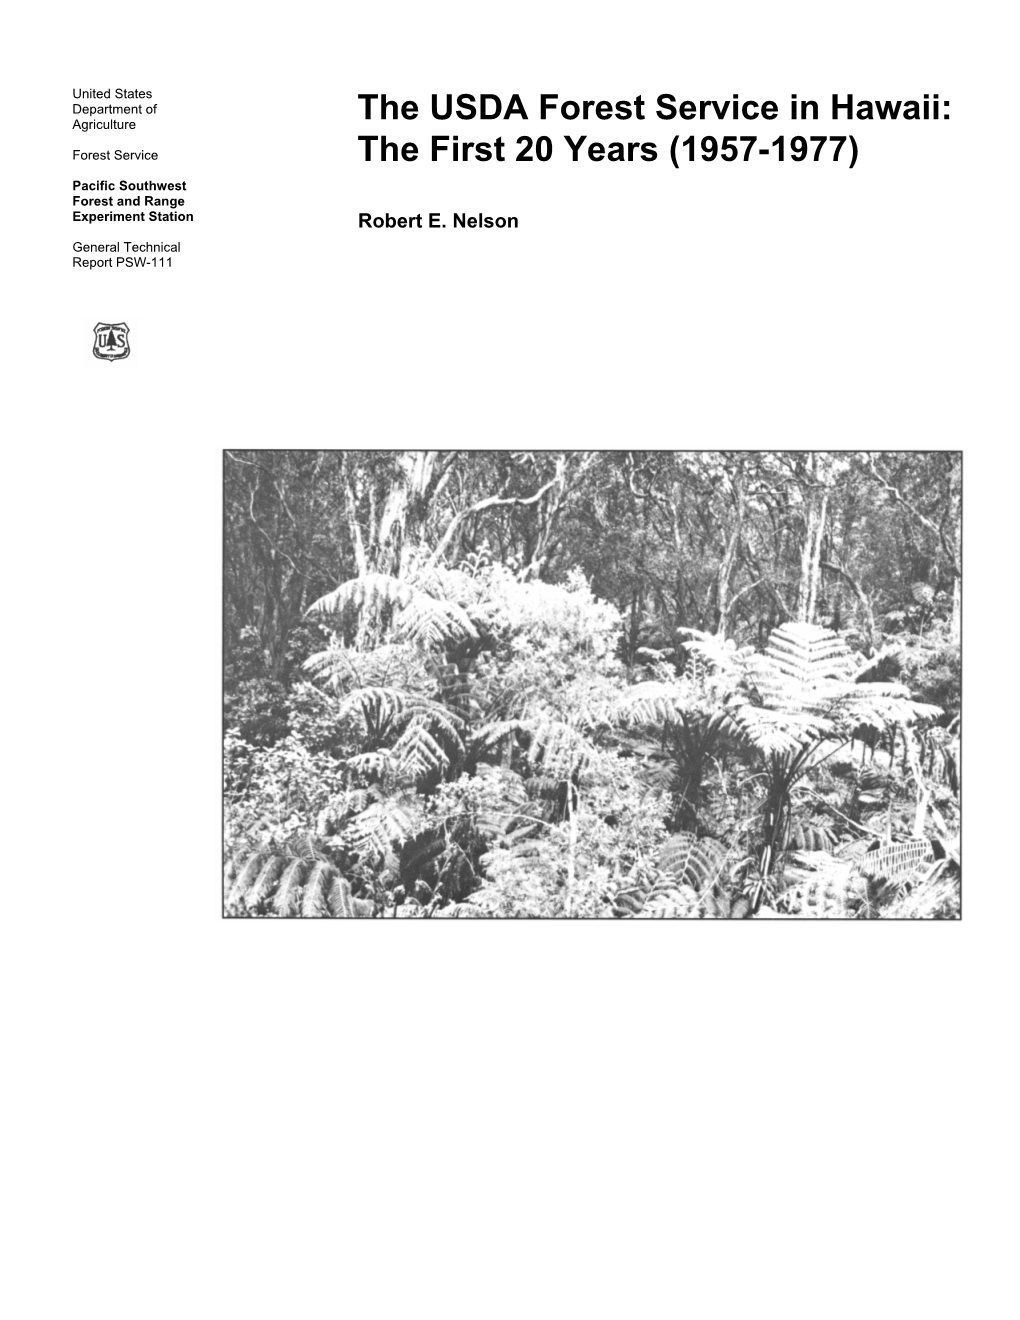 The USDA Forest Service in Hawaii: the First 20 Years (1957-1977)